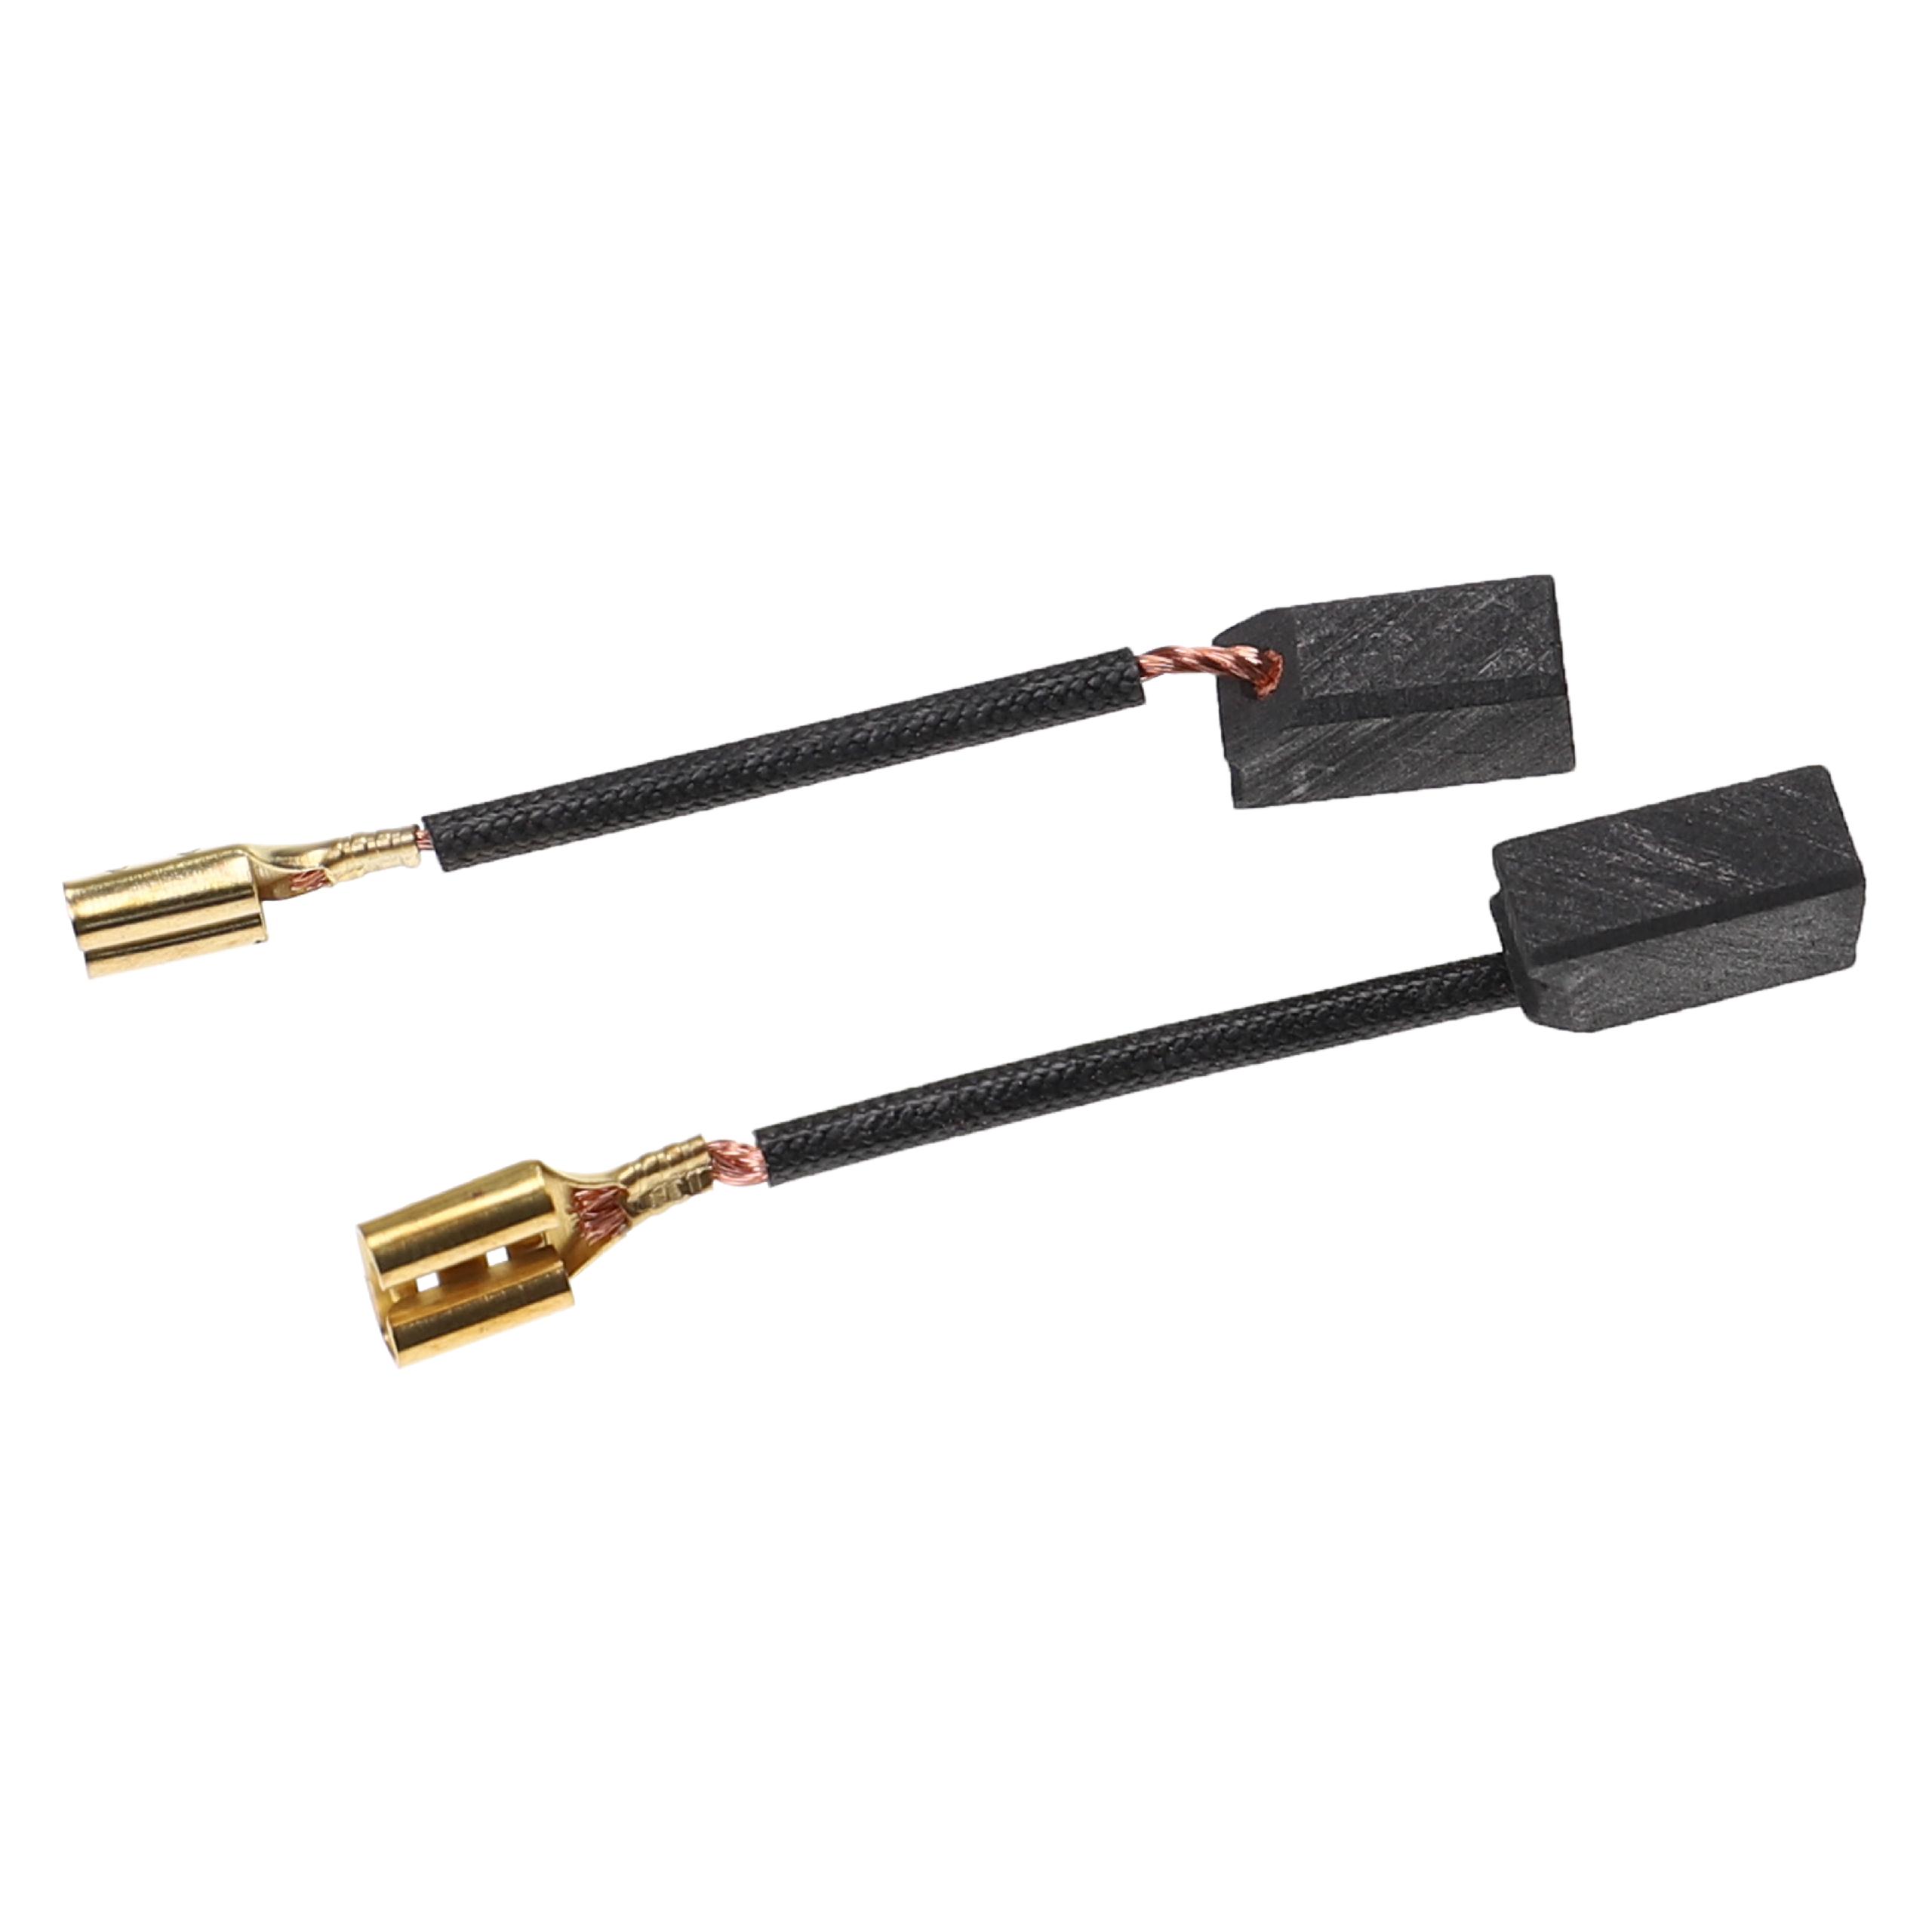 2x Carbon Brush 6 x 8 x 14 mm for power tool / angle grinder